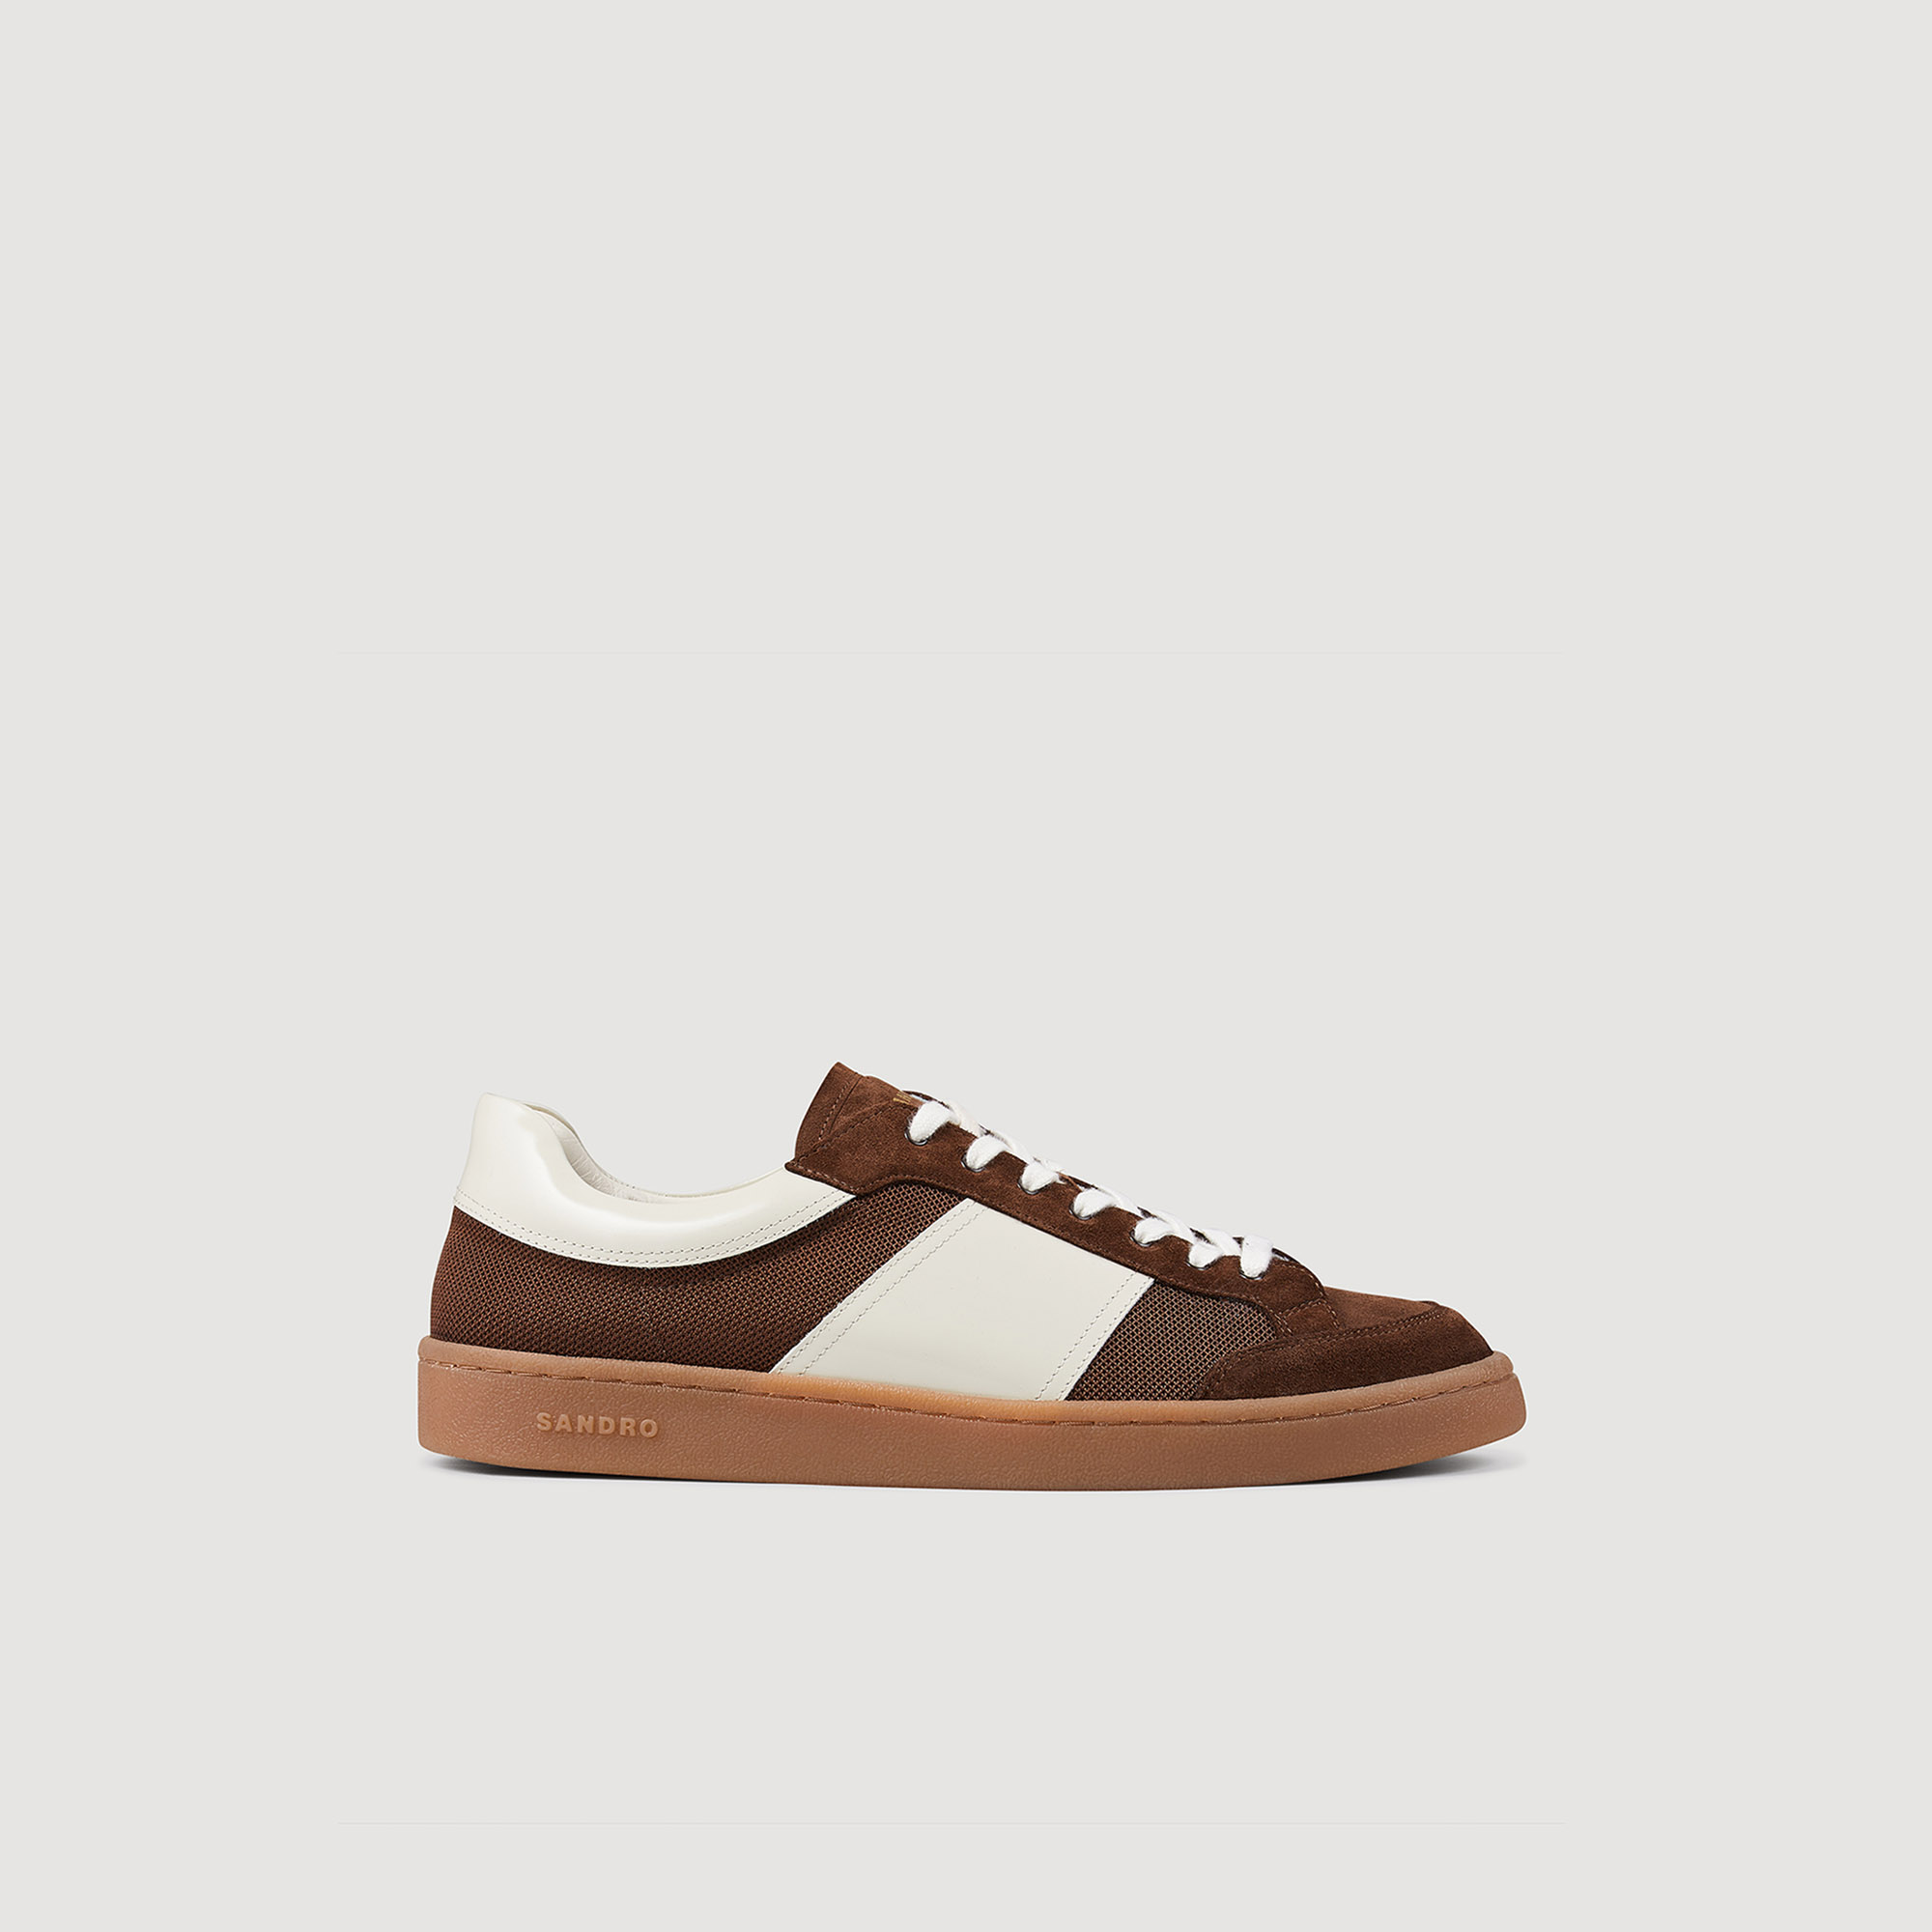 Sandro polyester Lining: Low-top sneakers with a vintage look crafted from suede and technical mesh, adorned with patent leather inserts on the sides and back, a tongue featuring a Sandro logo, contrasting laces, metal eyelets, and a gum sole